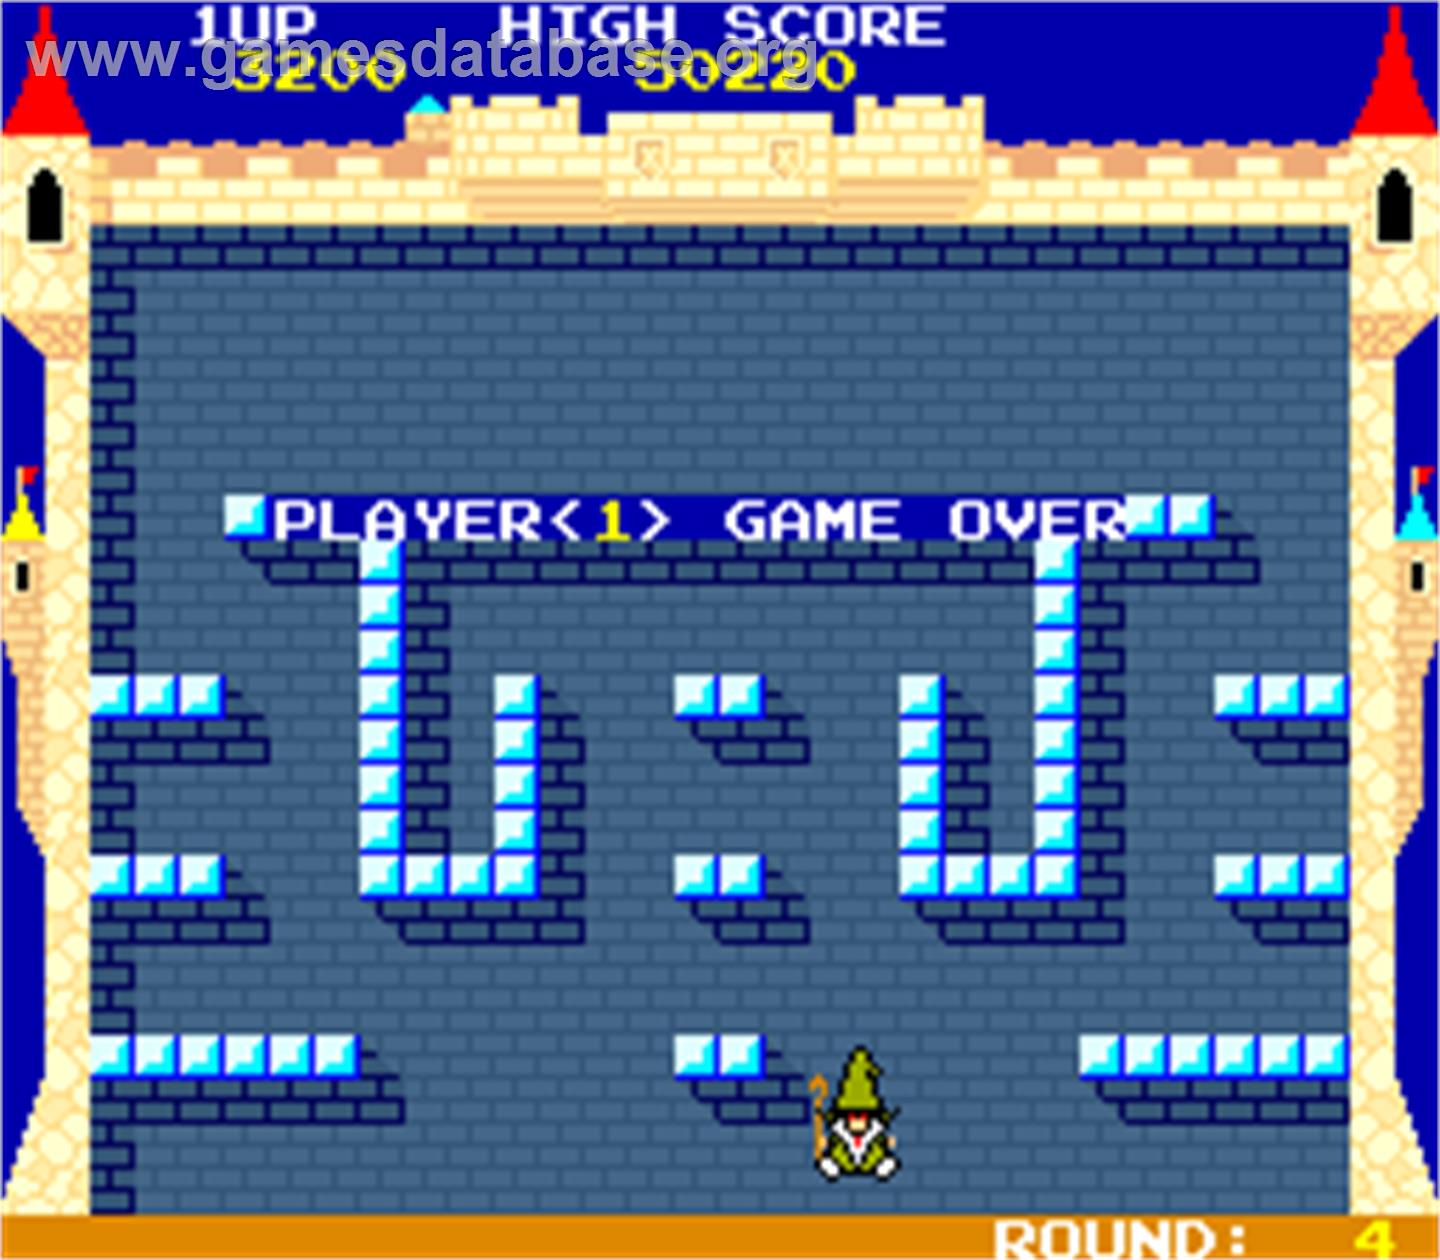 The FairyLand Story - Arcade - Artwork - Game Over Screen